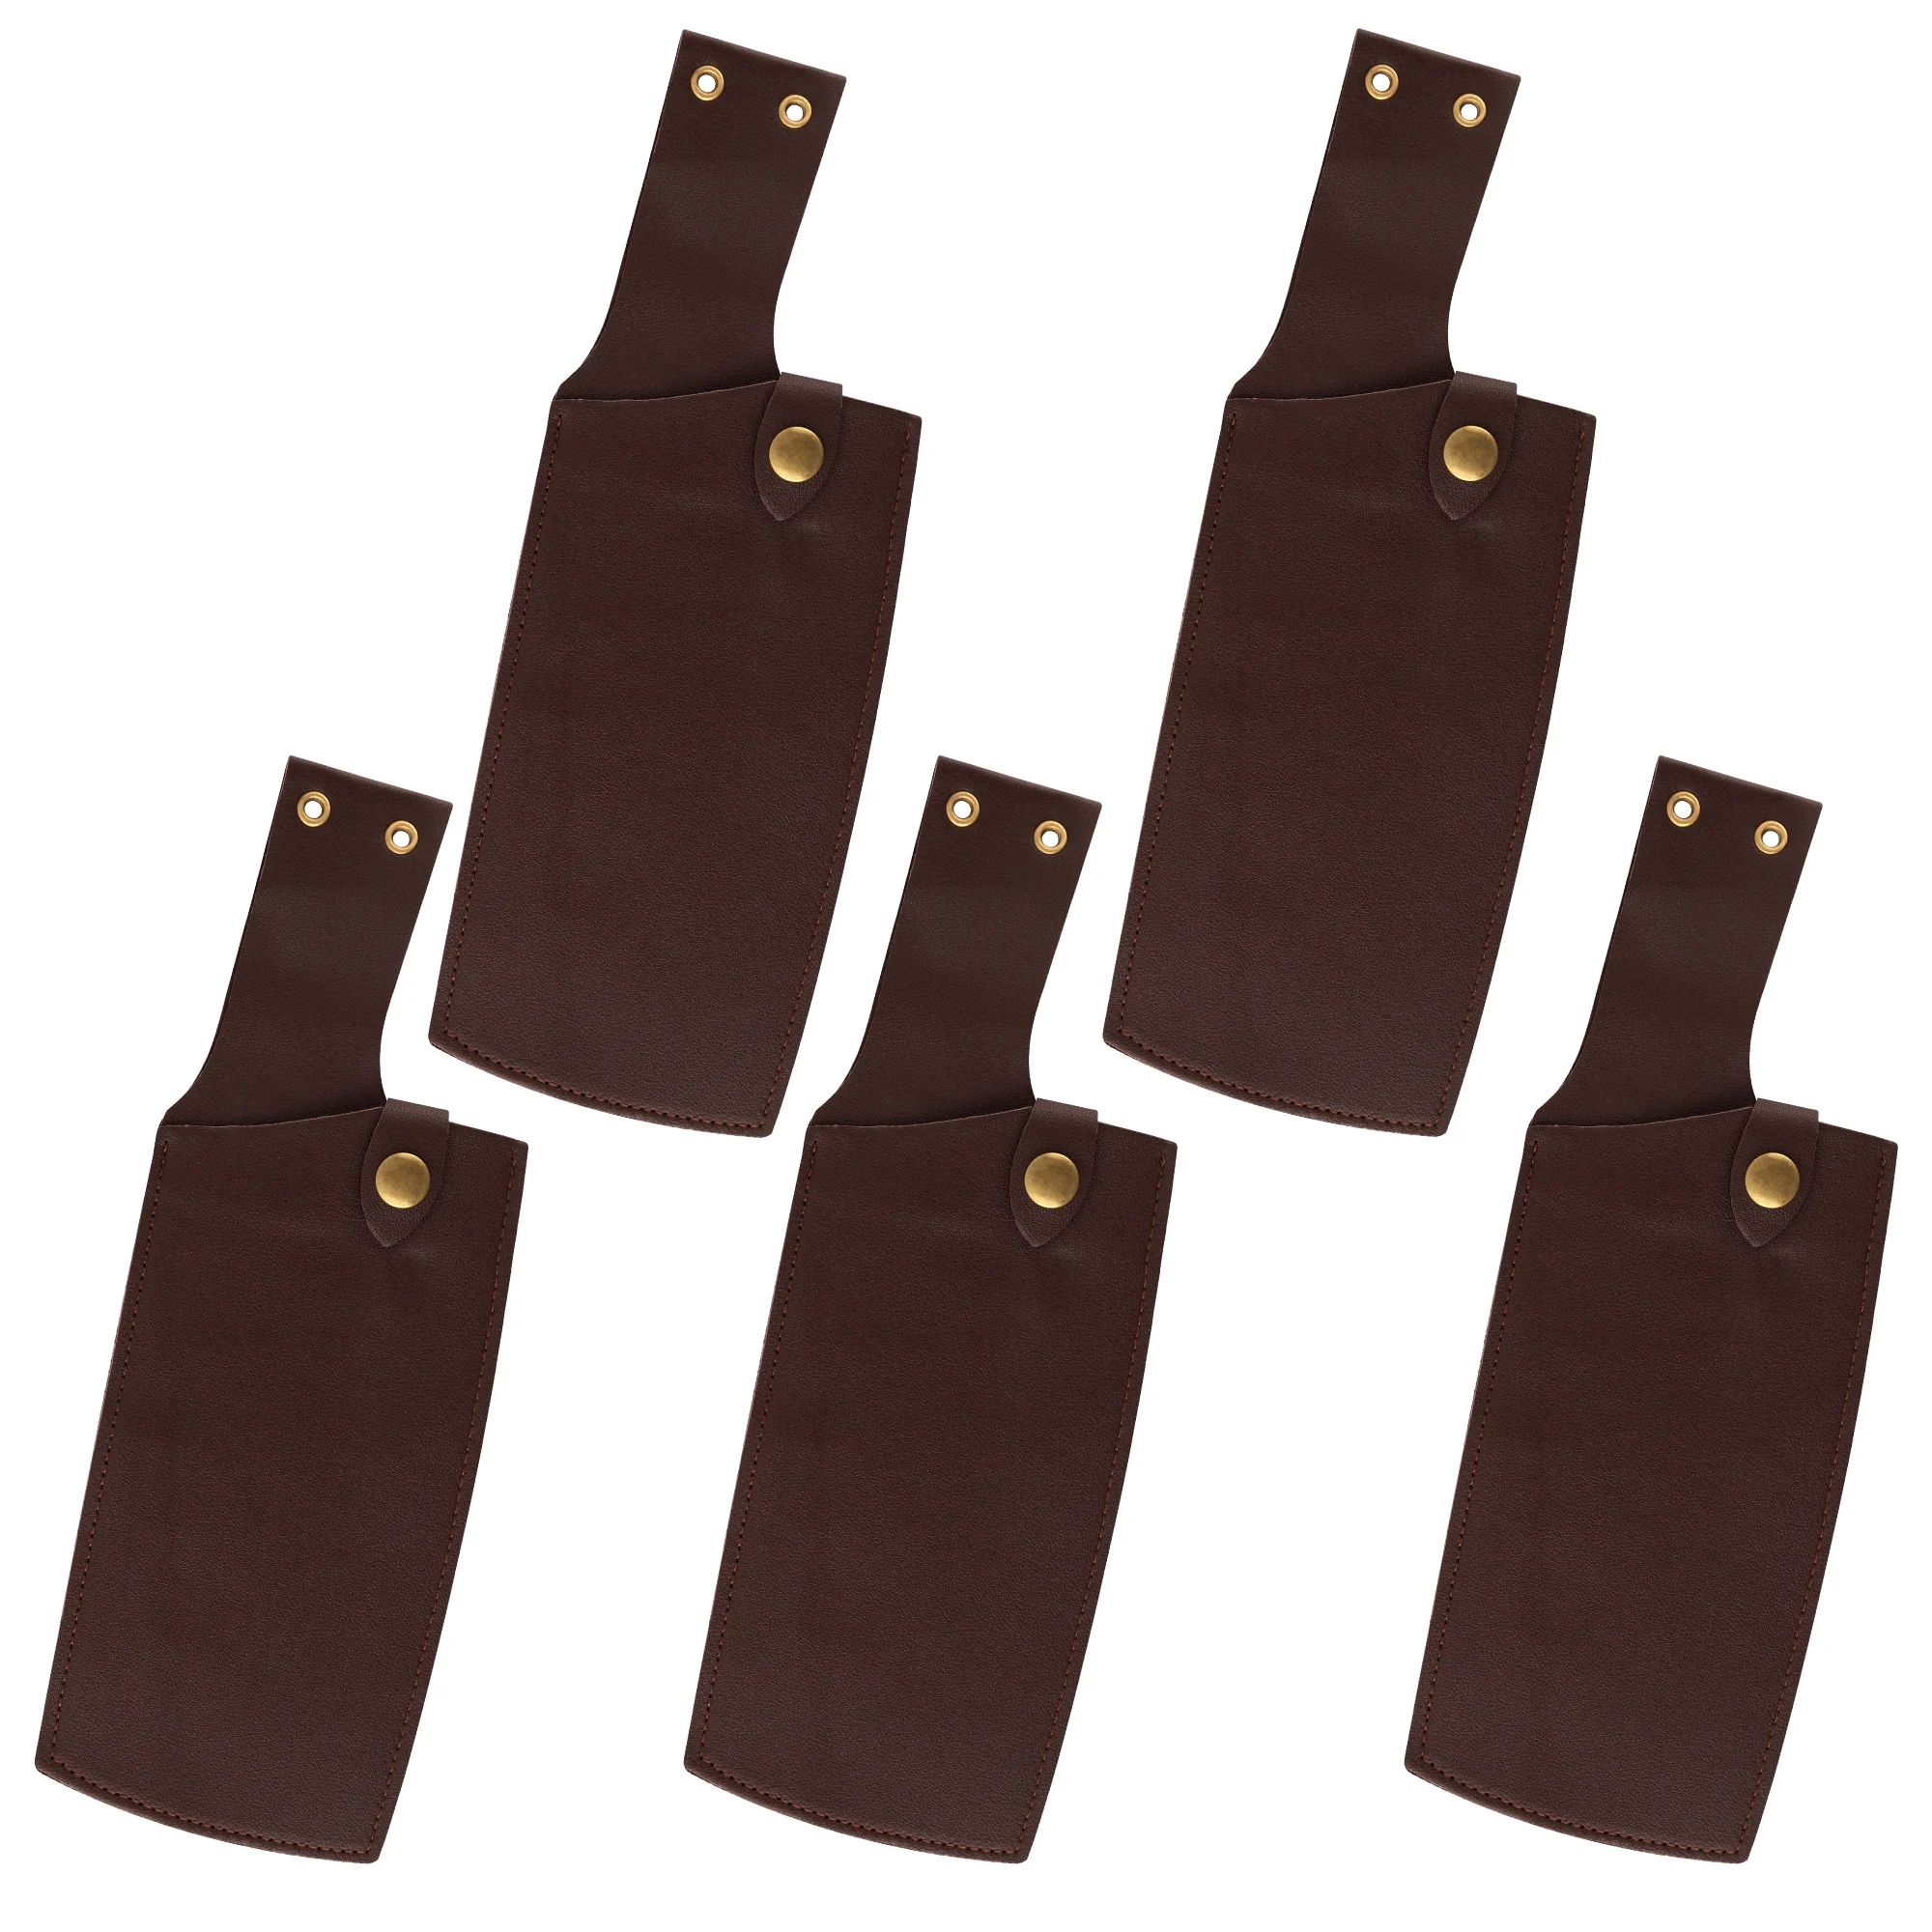 XYj 5 Pieces Kitchen Knife PU Leather Sheath Belt Loop Knife Edge Guard Blade Protective Cover Knife Sleeves Outdoor Knife Tools